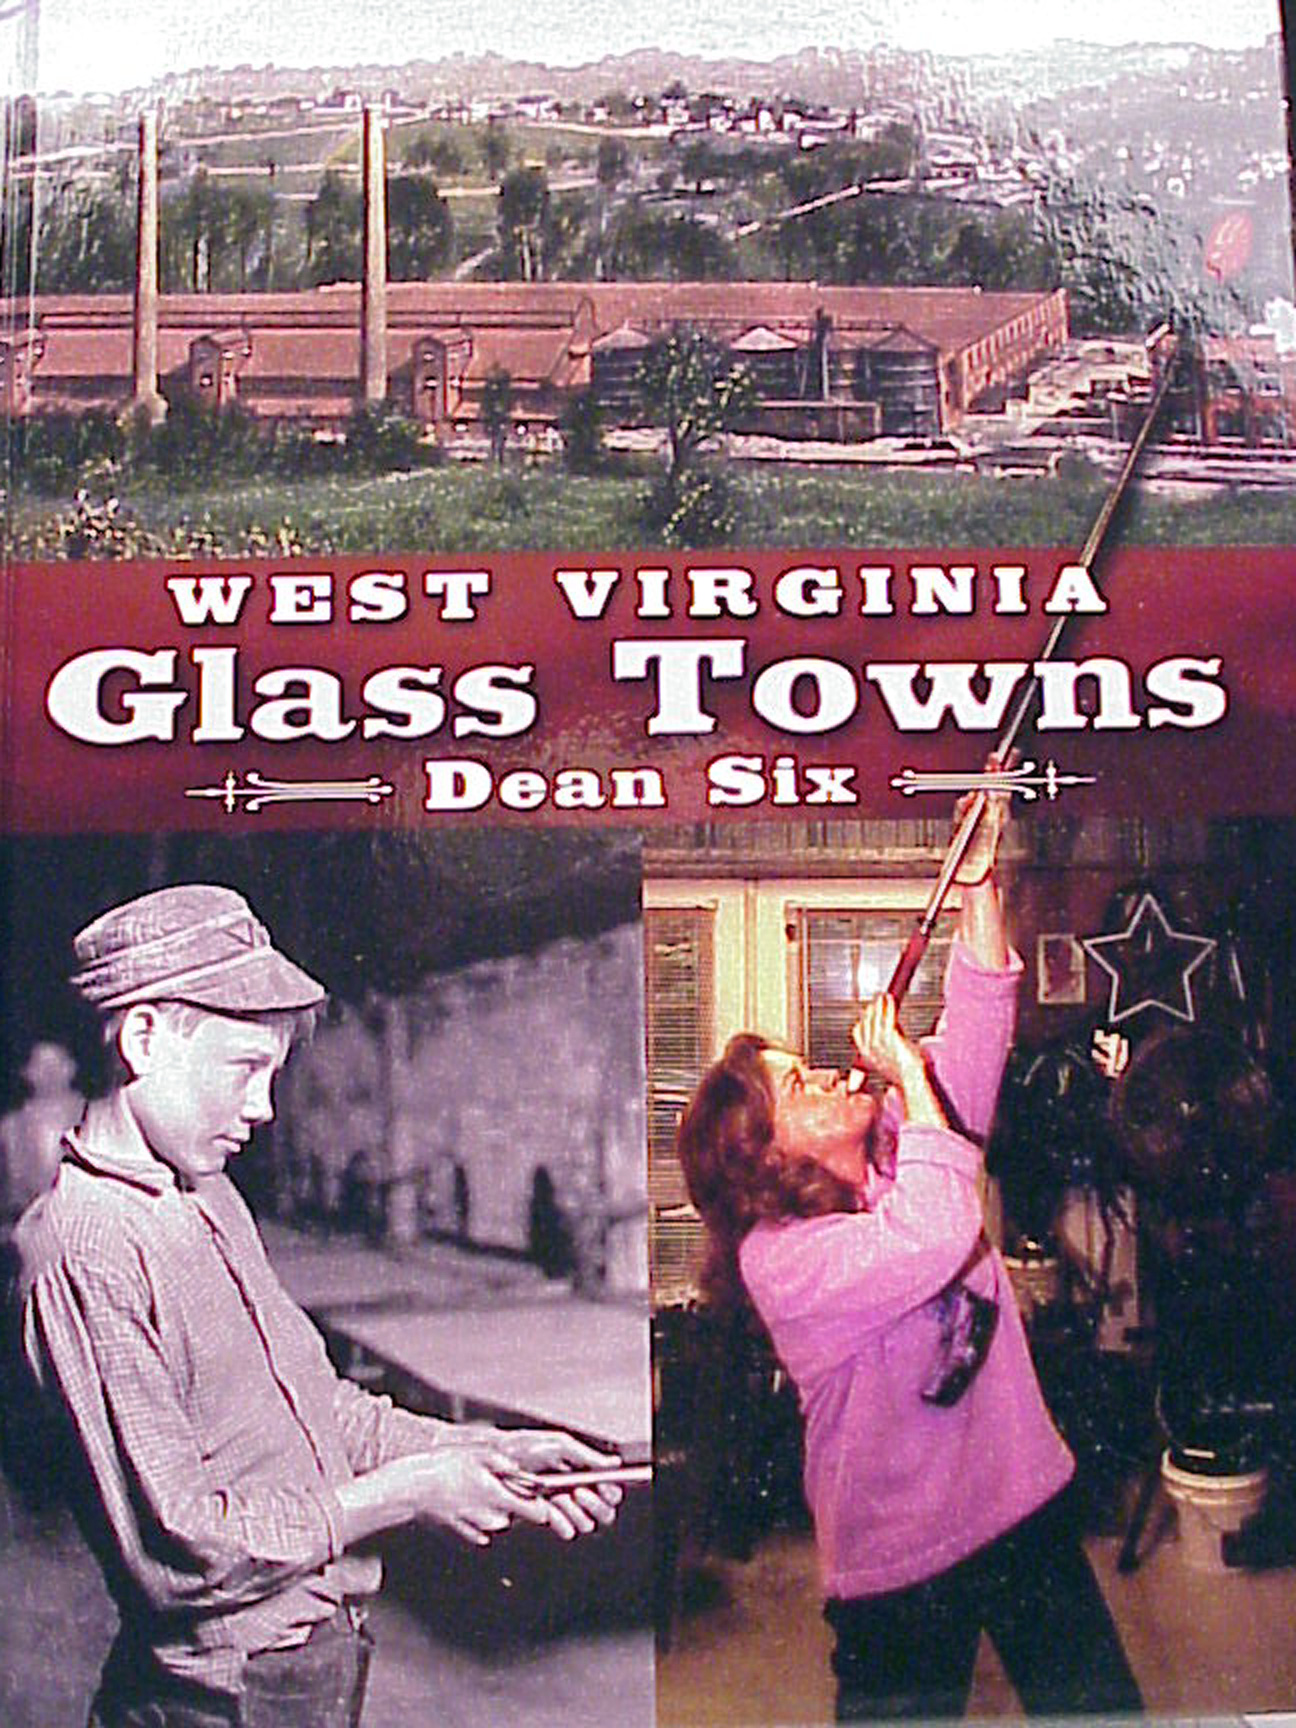 West Virginia Glass Towns by Dean Six